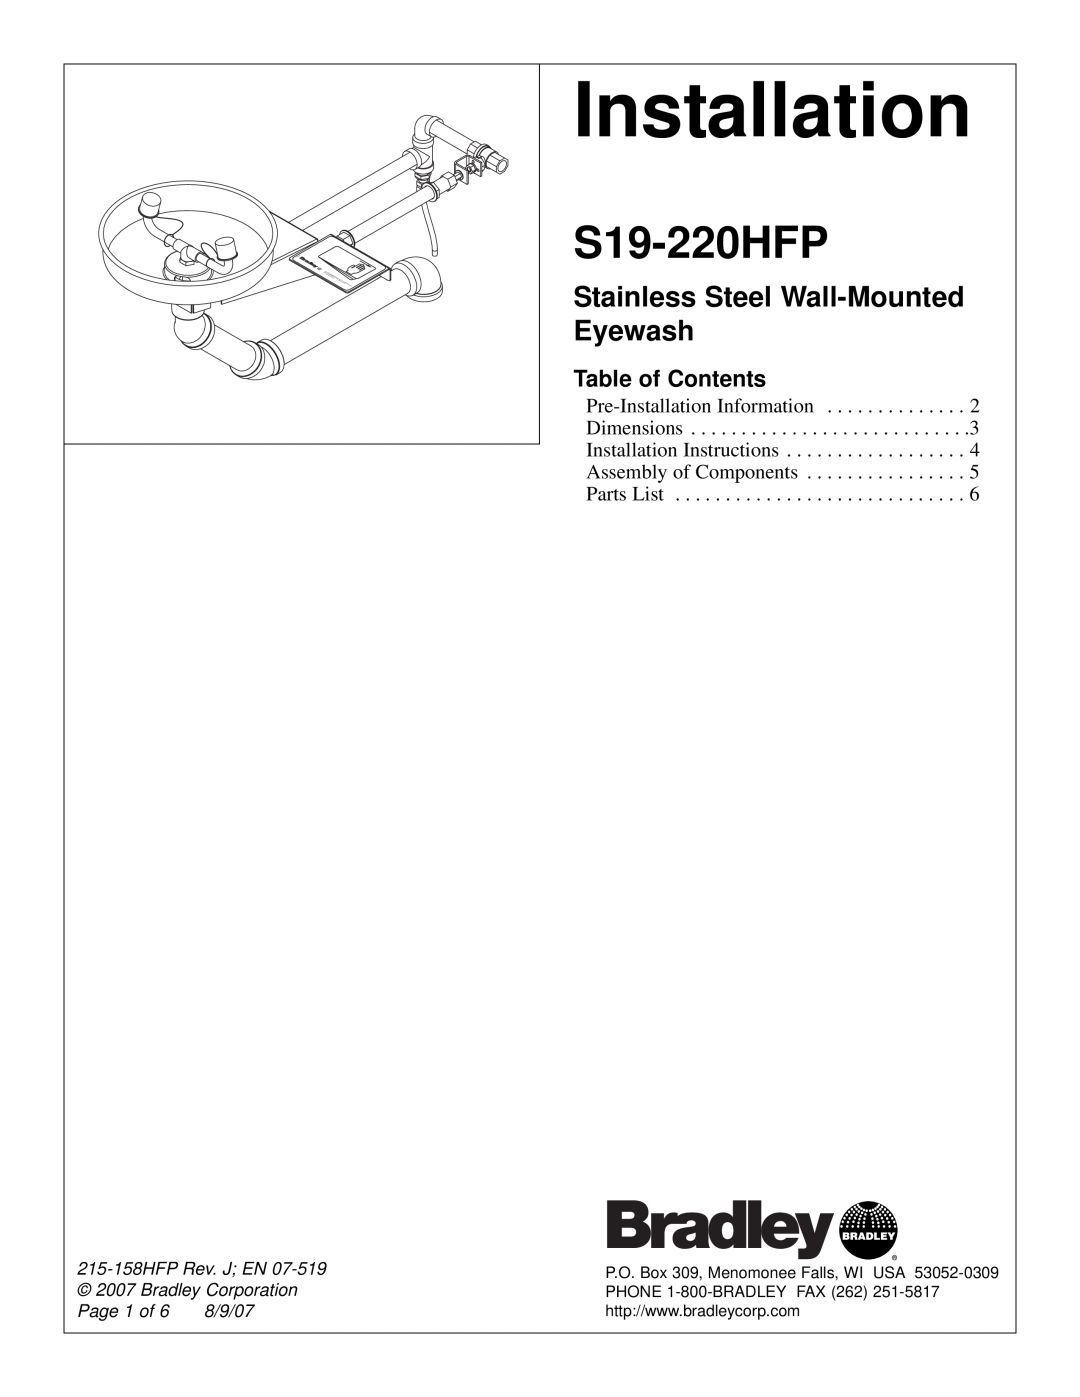 Bradley Smoker S19-220HFP dimensions Stainless Steel Wall-Mounted Eyewash, Table of Contents, Installation, Page 1 of 